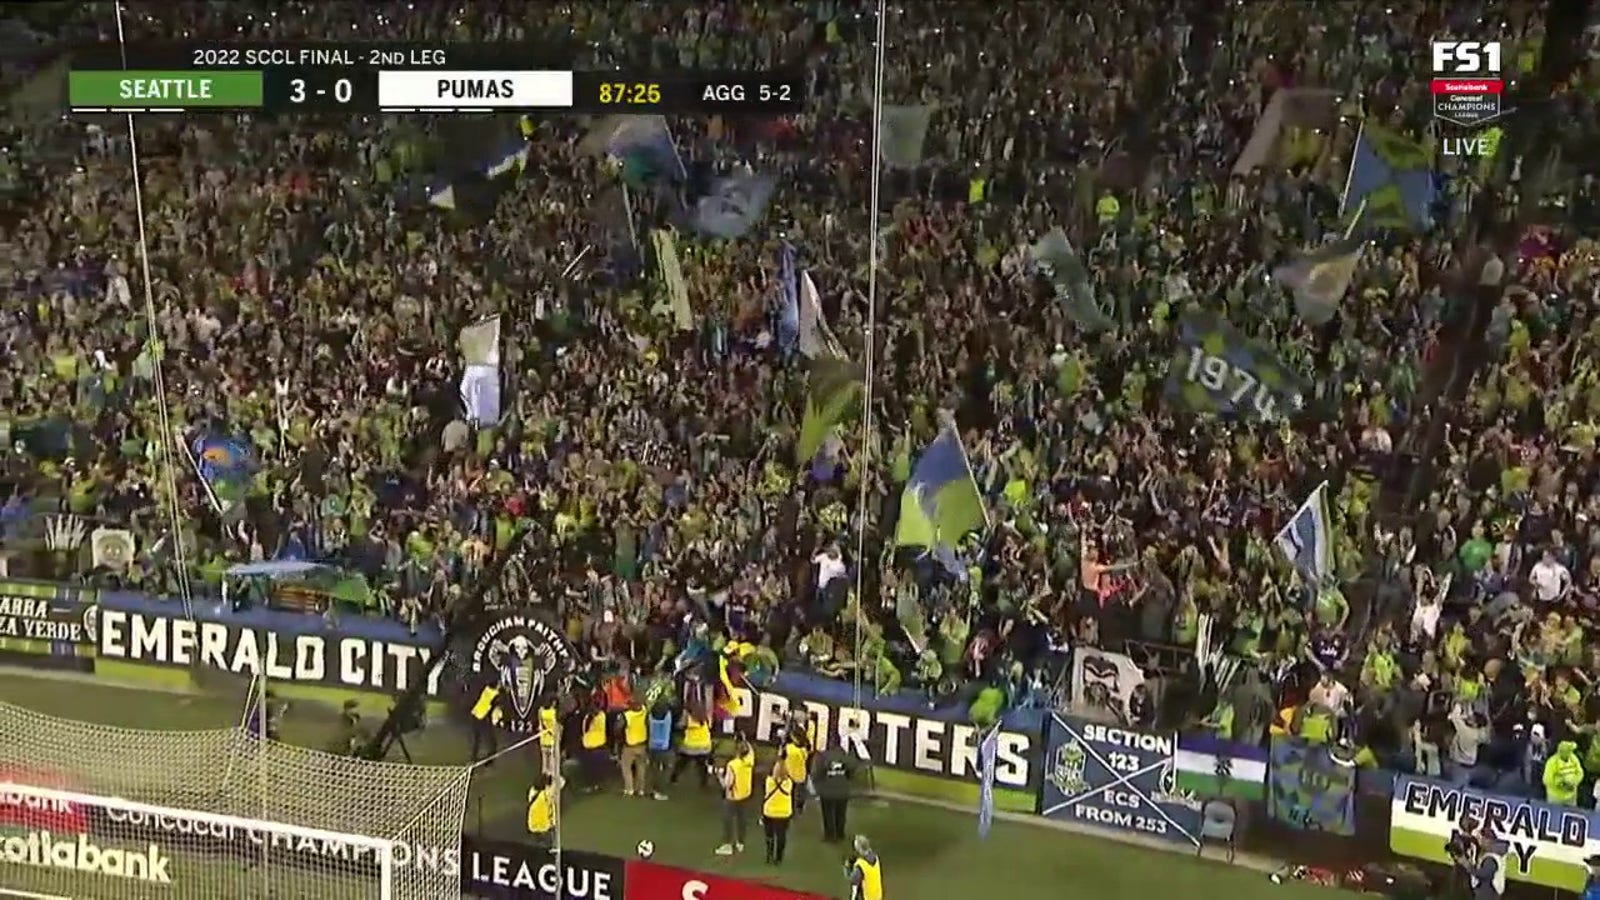 Nicolás Lodeiro adds to Seattle's lead in closing moments